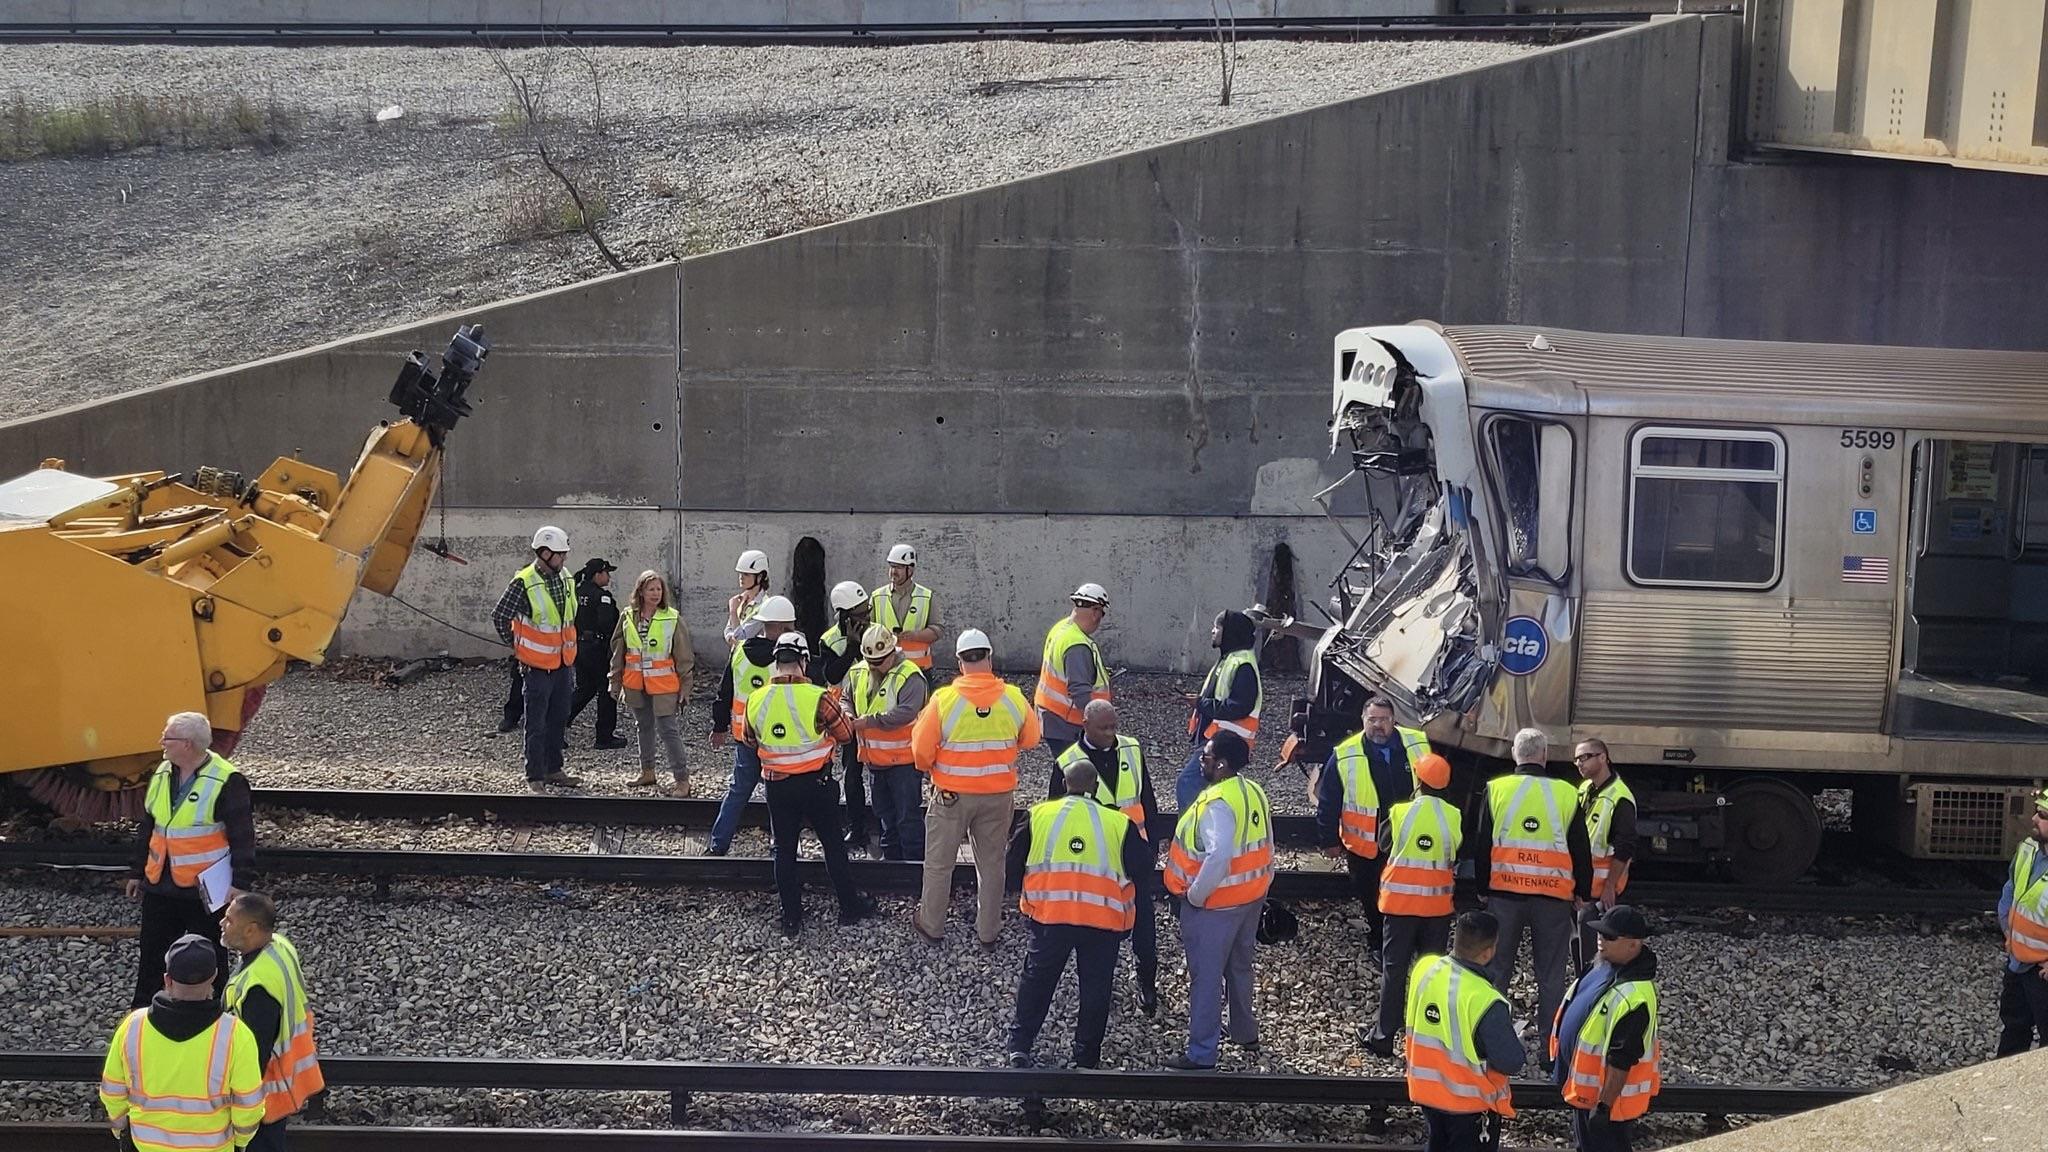 The derailed train. (Credit: Chicago Fire Department)